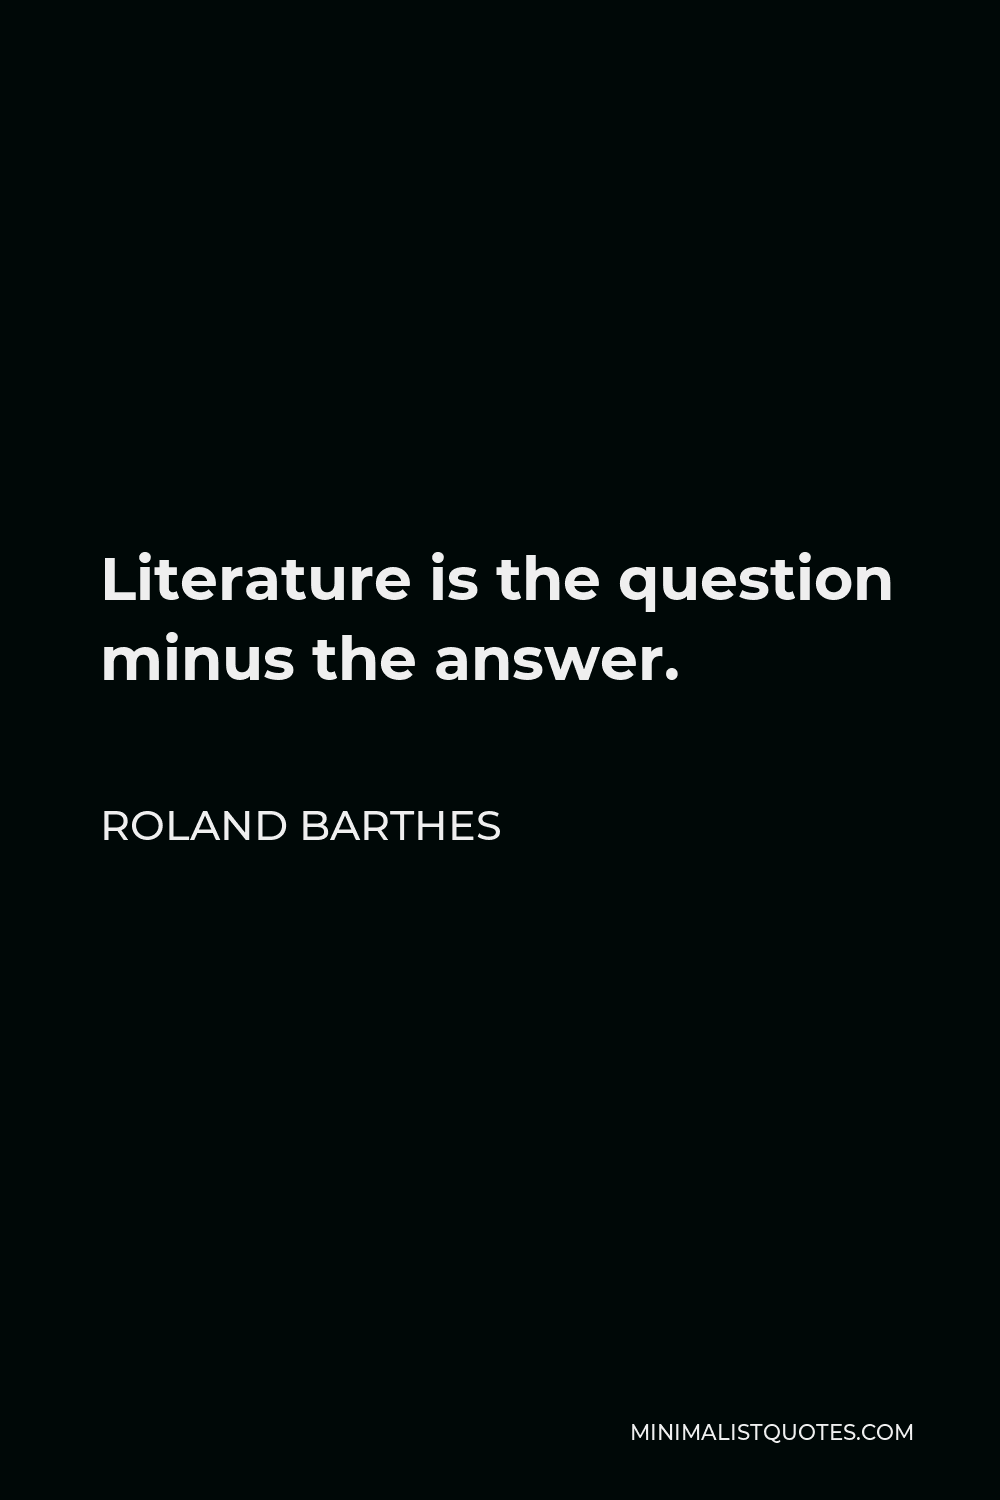 literature is the question minus the answer